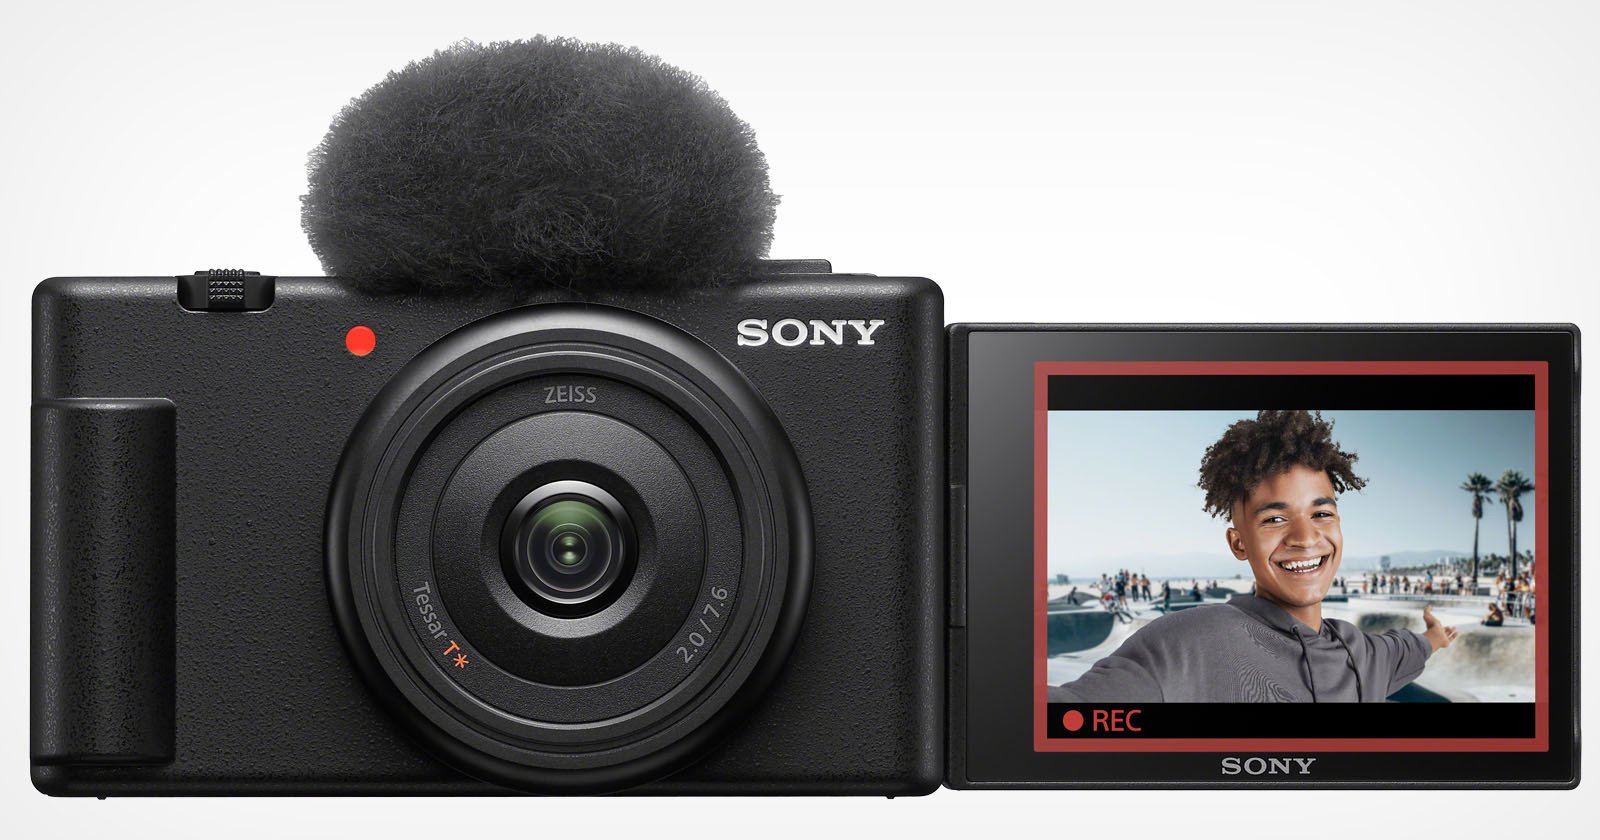  sony zv-1f video focused point-and-shoot made specifically 